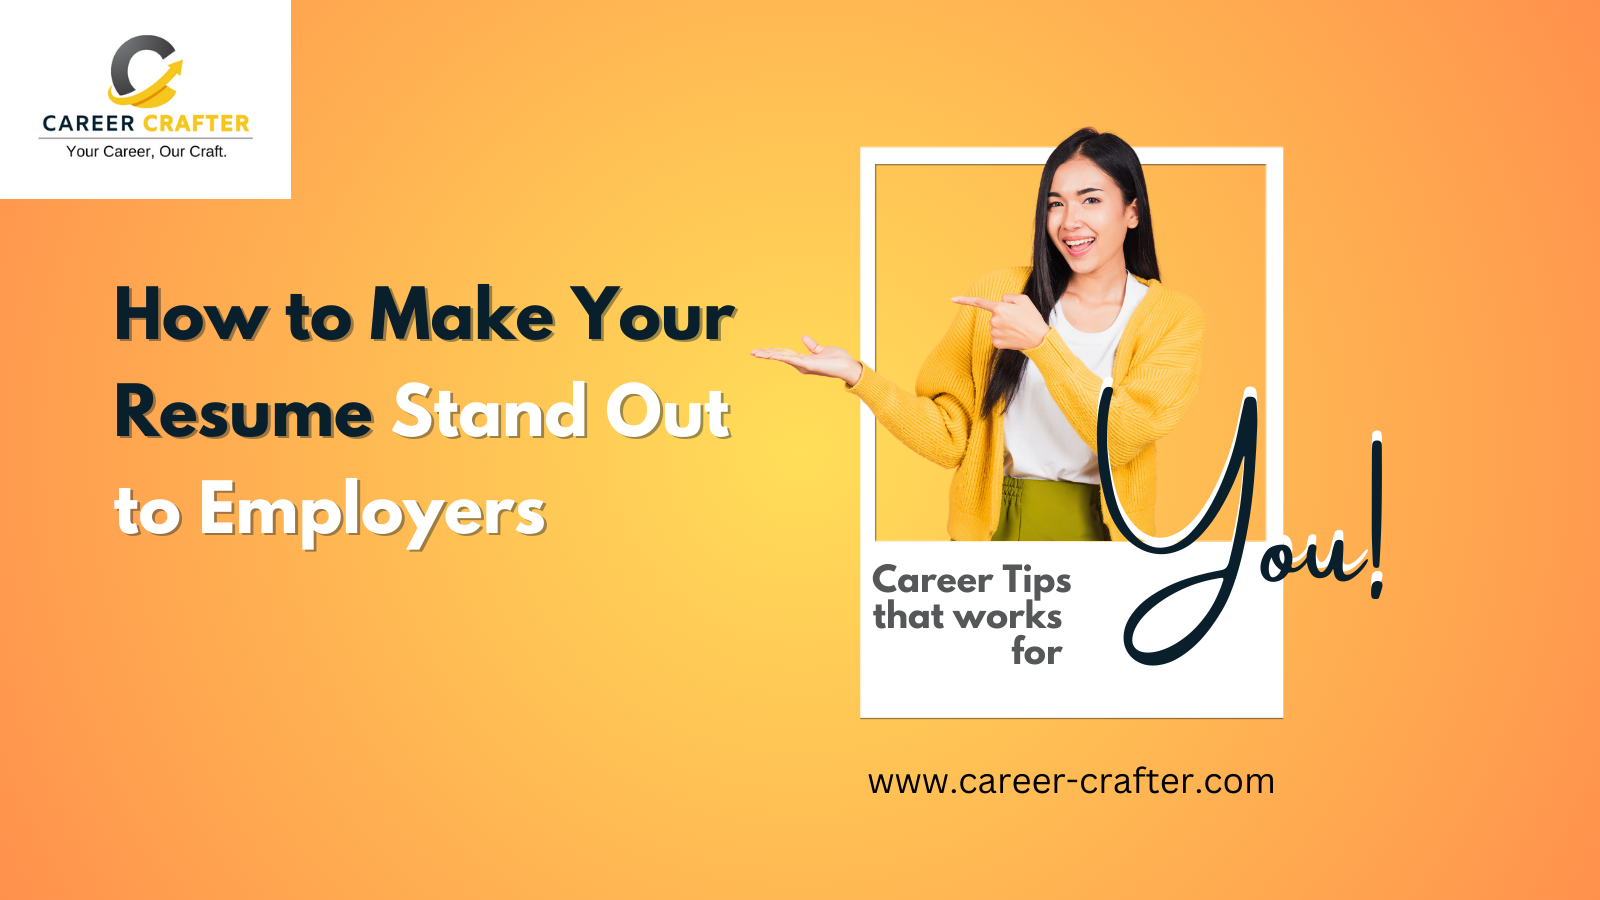 A joyful lady standing and pointing upwards, her face illuminated with the light of discovery, symbolizing the clarity and guidance found in the Career Crafter blog on making your resume stand out.